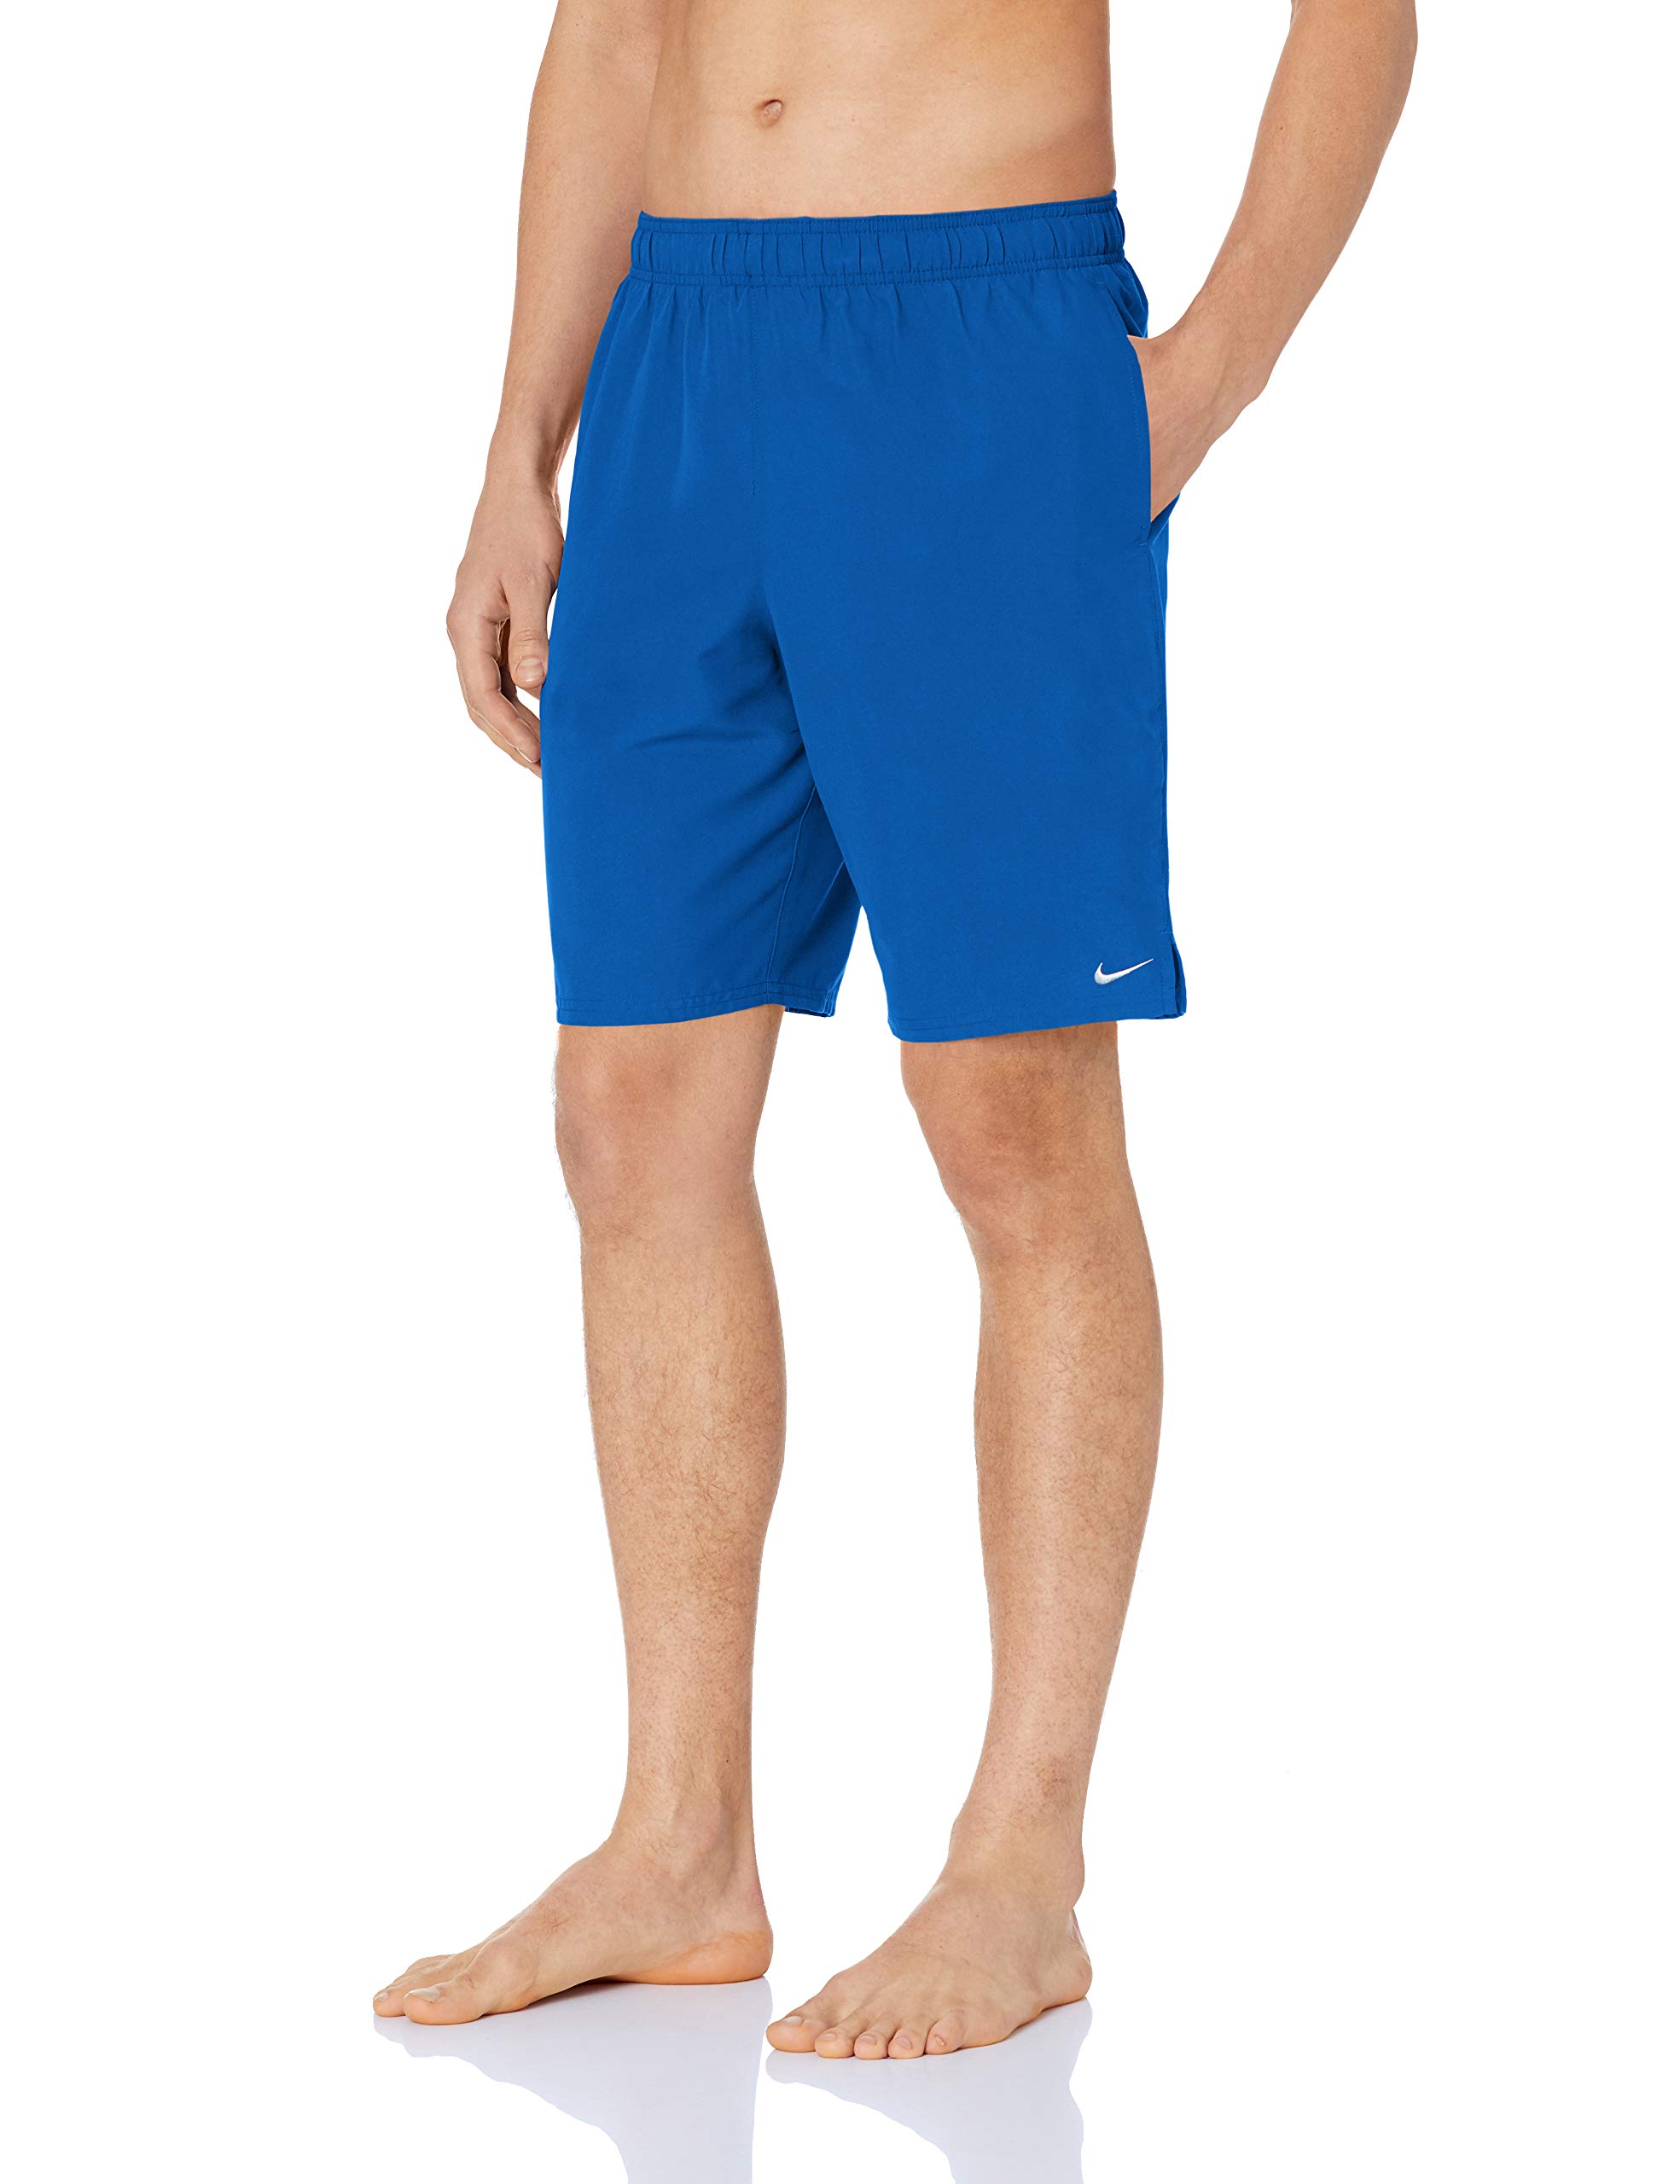 Nike Mens Solid Lap 9 Inch Volley Short Swim Trunk - Game Royal White - XXL